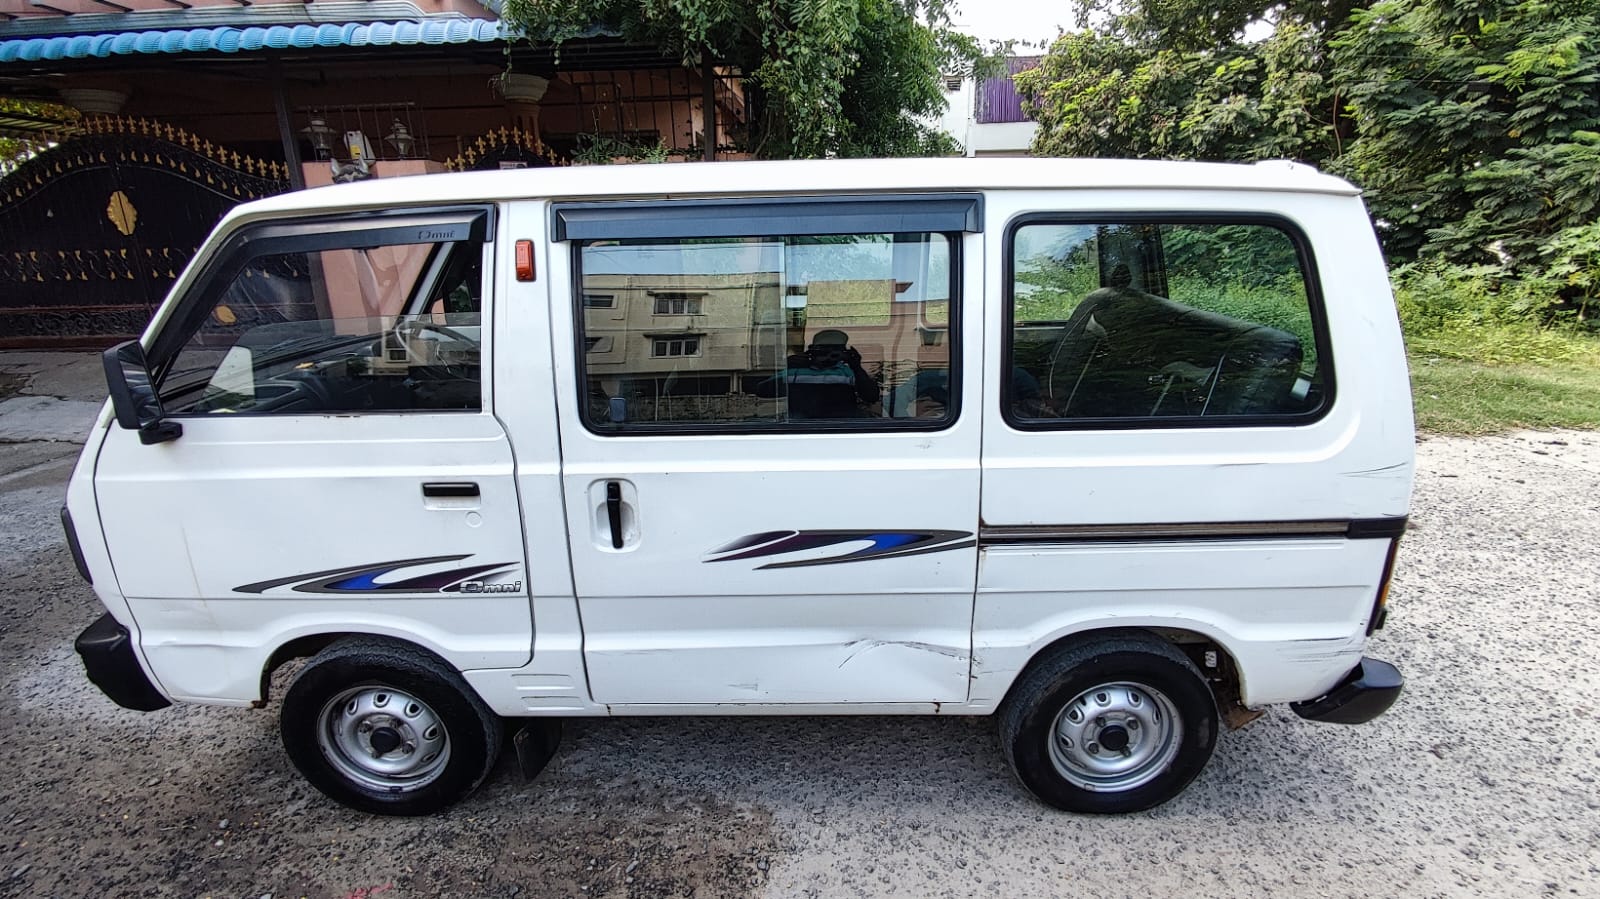 4173-for-sale-Maruthi-Suzuki-Omni-Petrol-First-Owner-2017-TN-registered-rs-270000